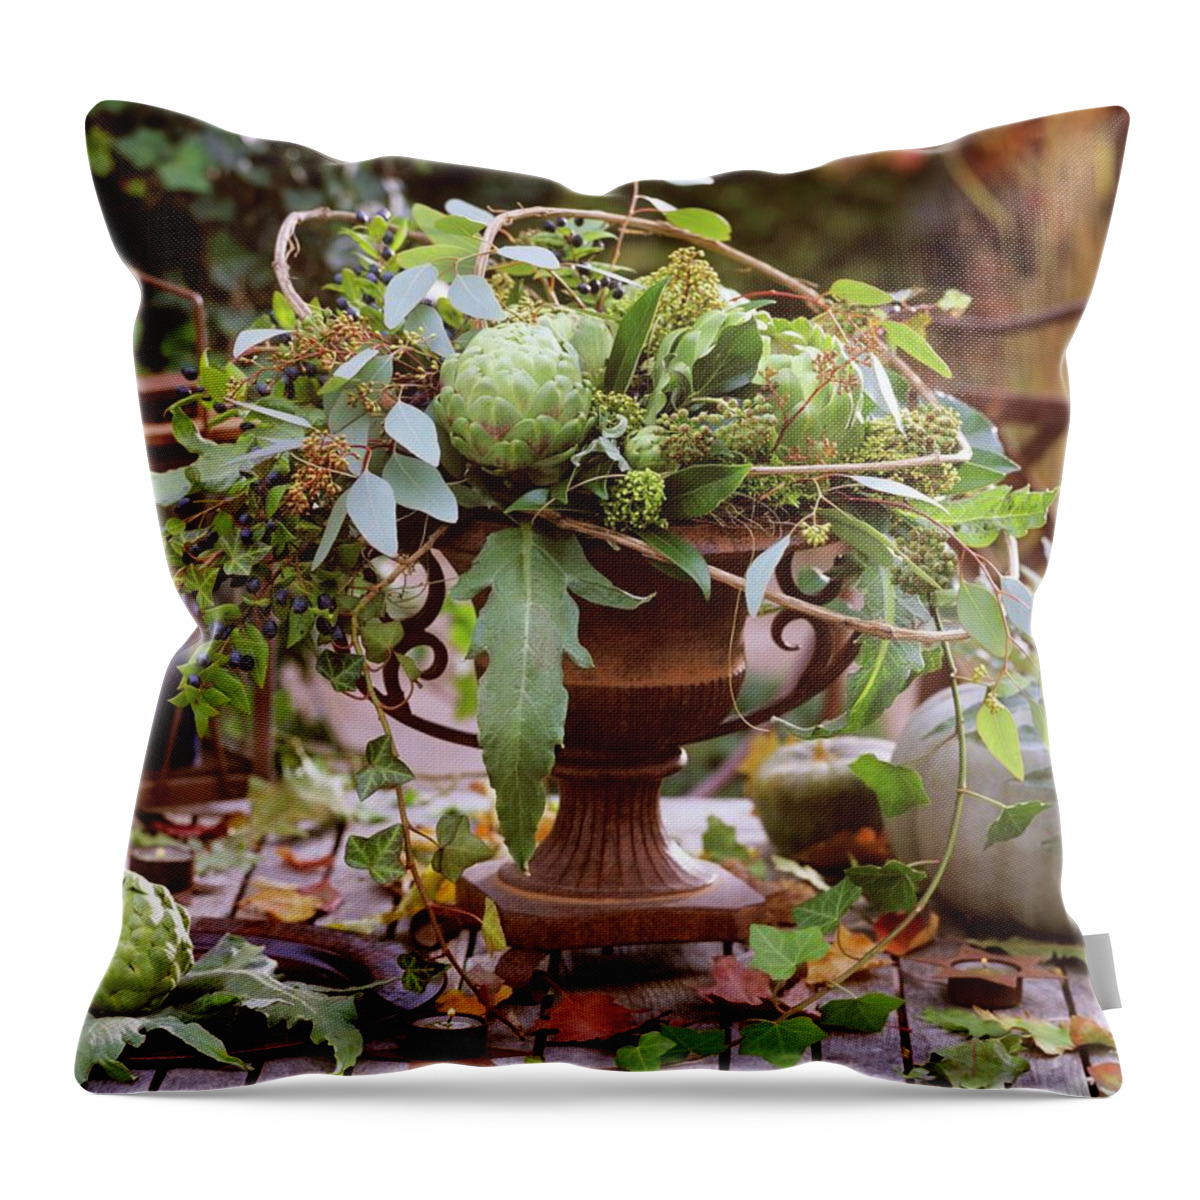 Ip_00272347 Throw Pillow featuring the photograph Artichokes, Hedera - Ivy, Myrtus - Myrtle Branches With Fruits by Friedrich Strauss